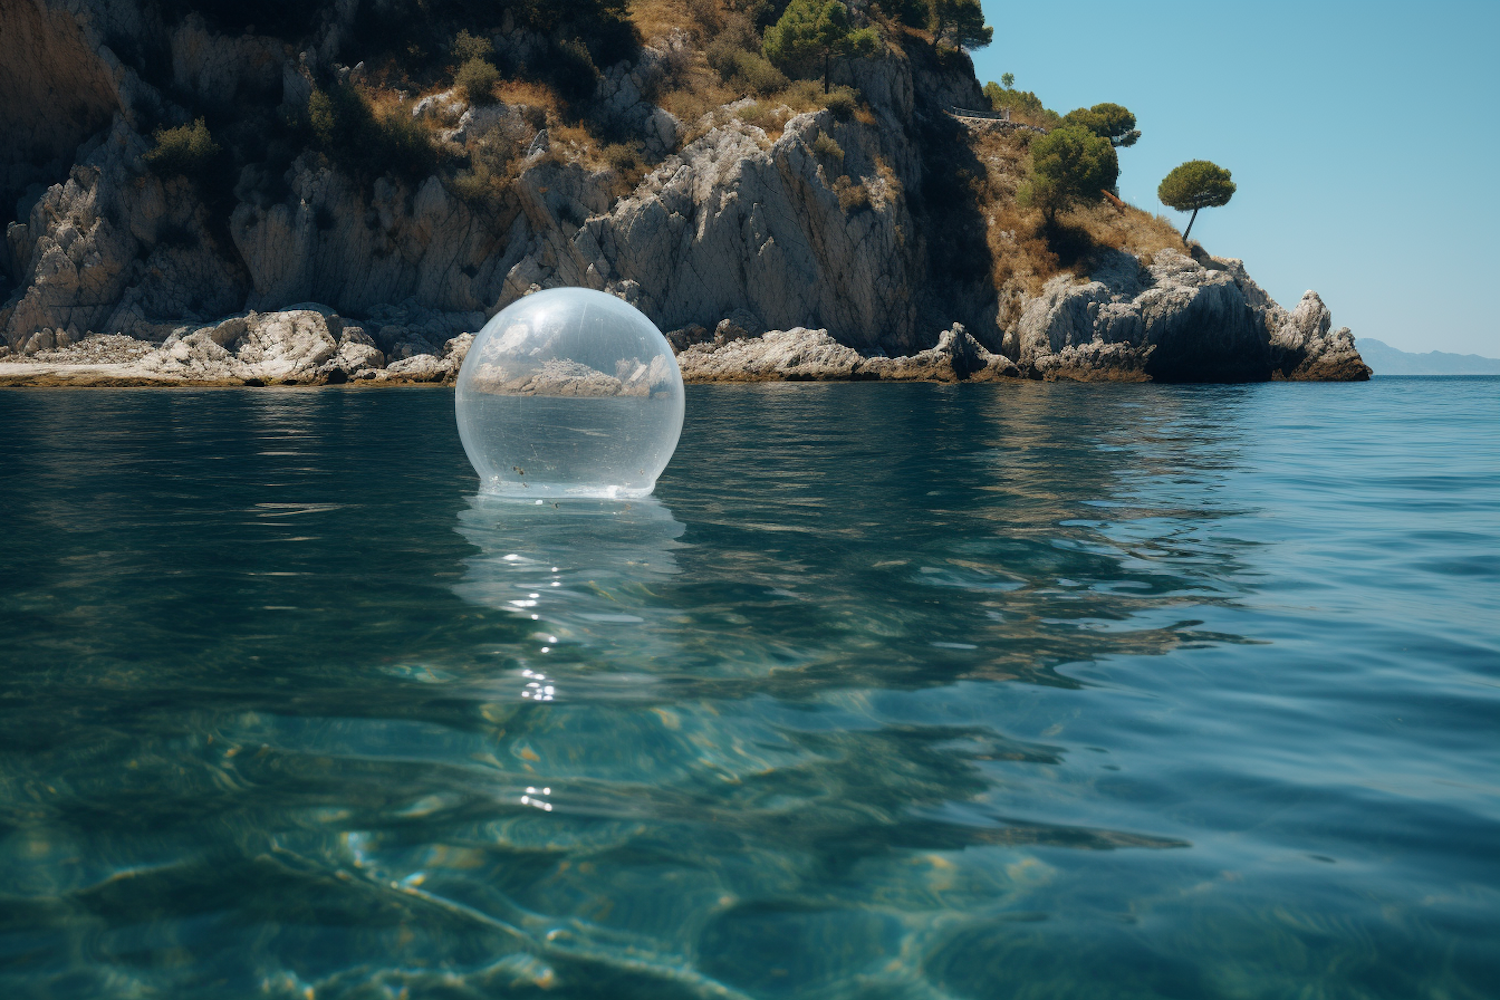 Tranquil Reflections: Sphere Amidst Nature